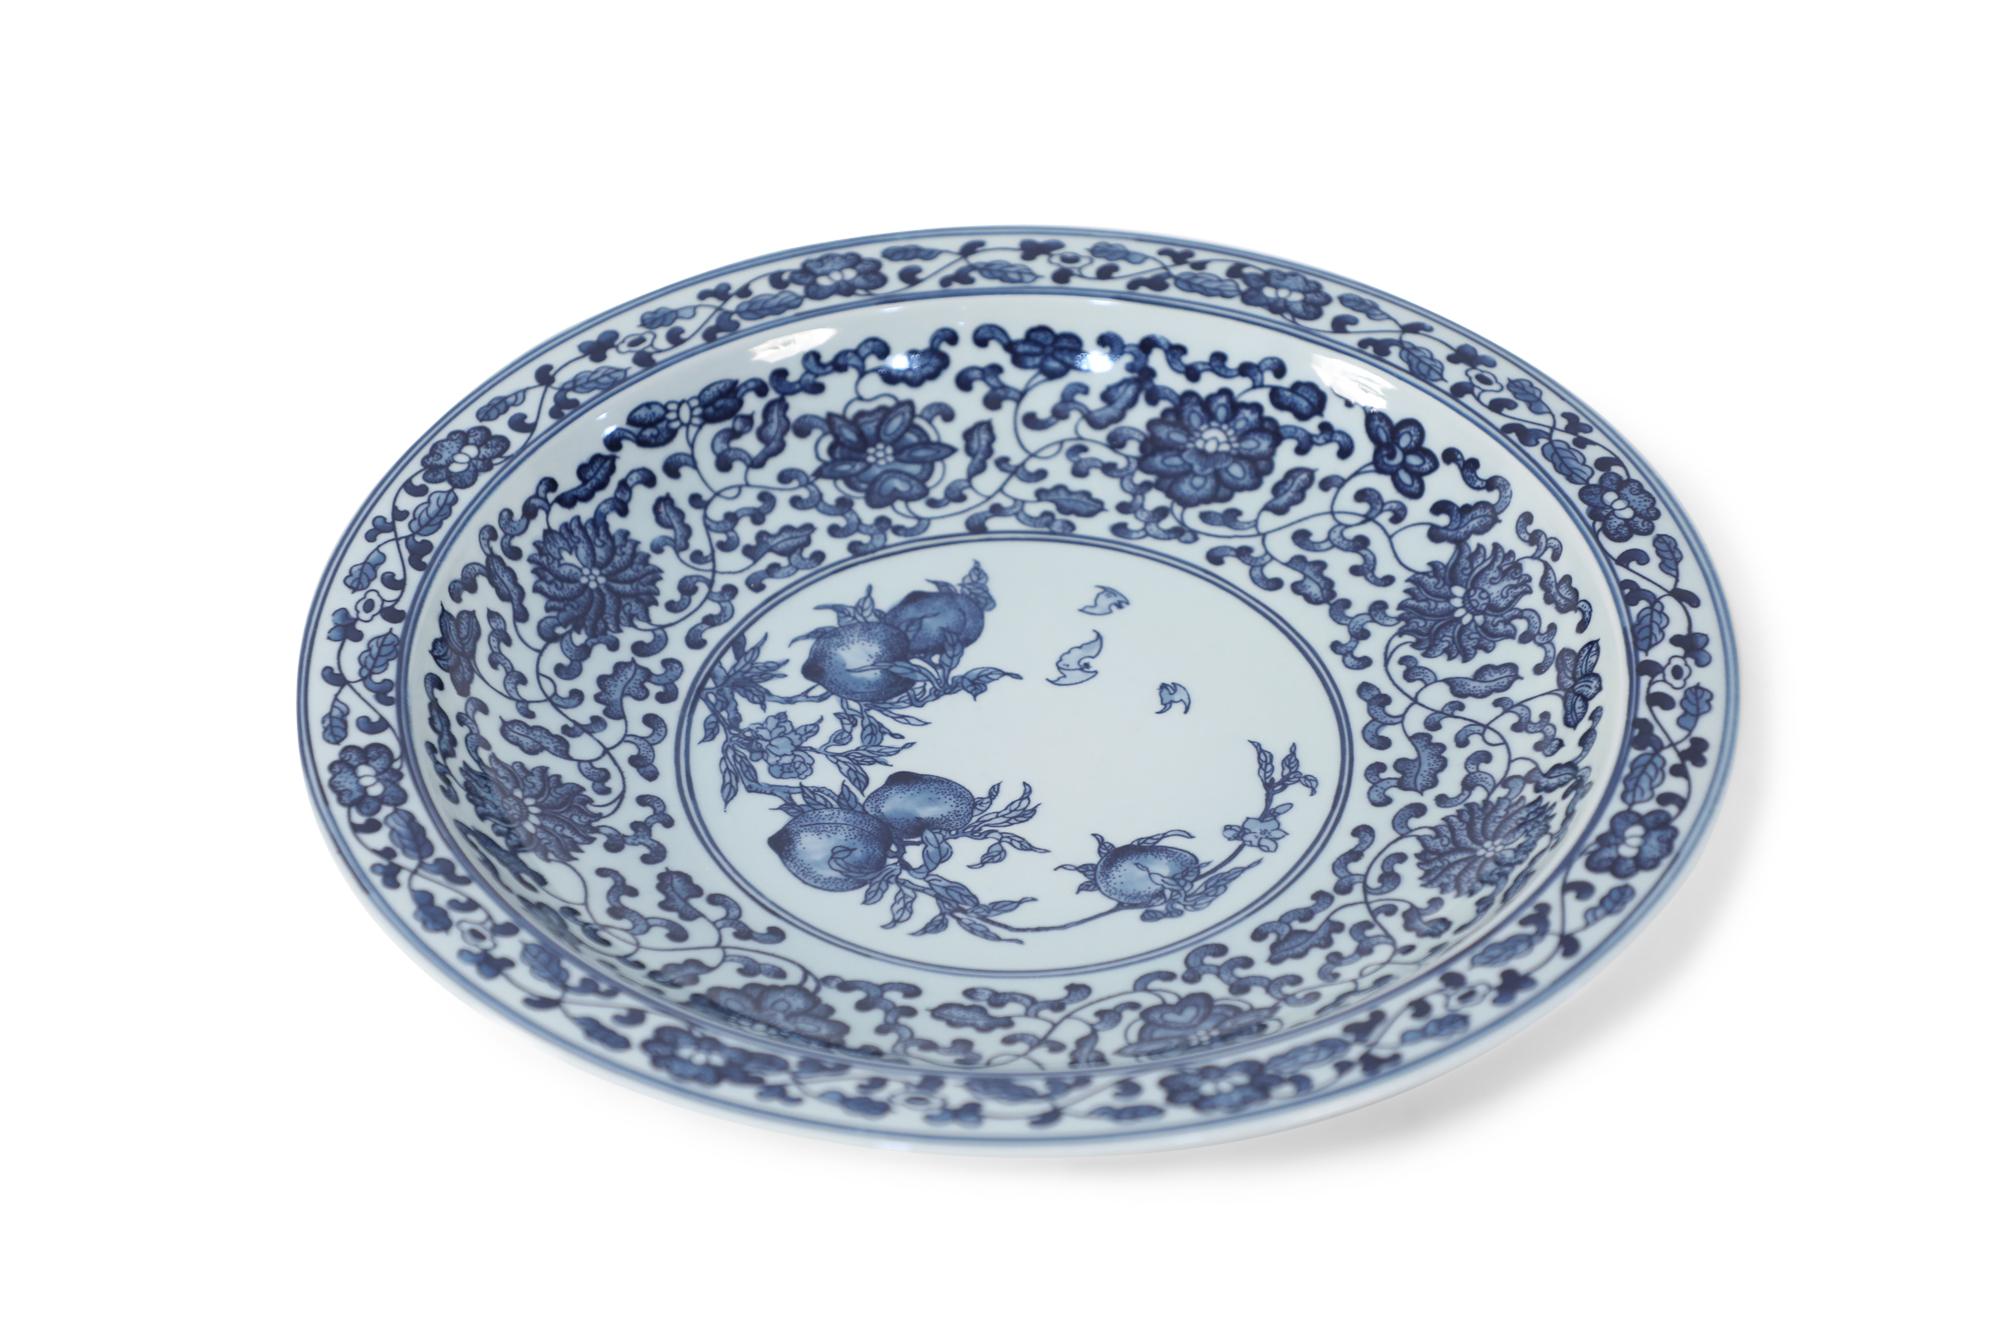 Pair of Chinese blue and white porcelain decorative plates painted with thin blue double lines surrounding floral garlands along the rims, opening to wider florals and swirling vine motifs on the interiors that surround central vignettes of peaches